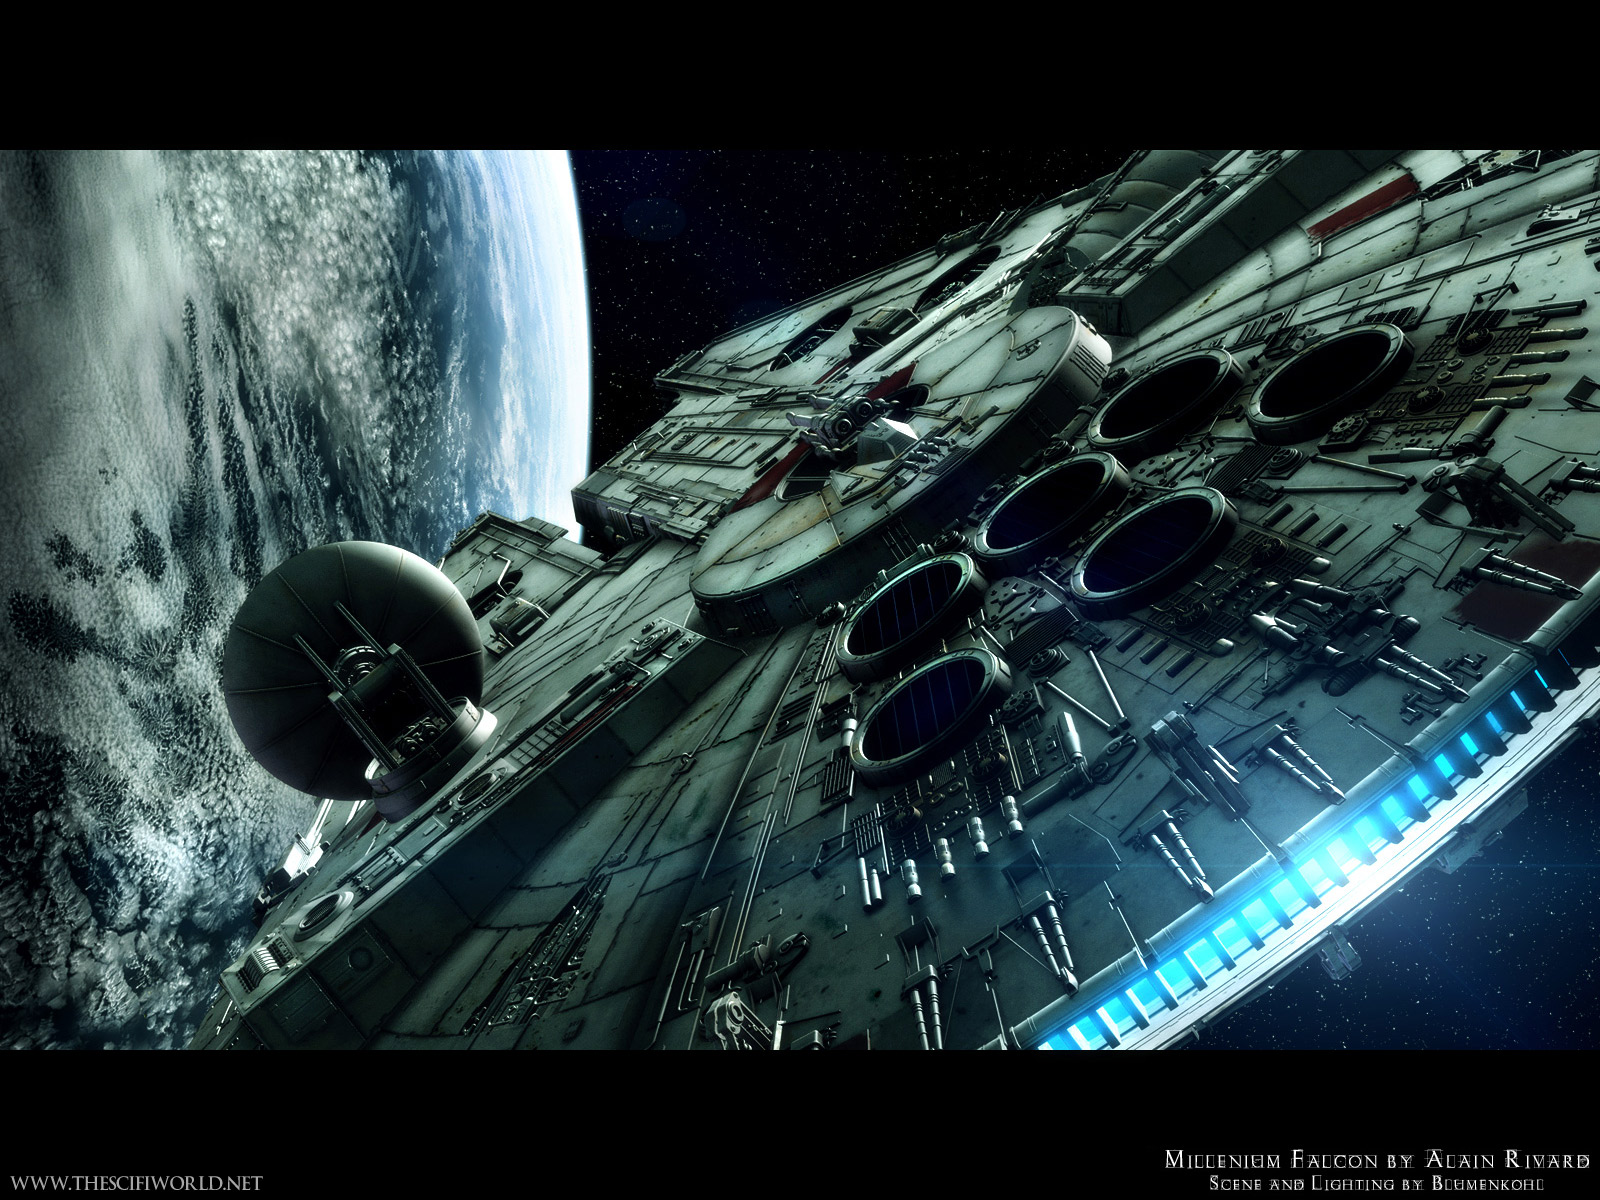 collection of cool desktop wallpaper pictures for Star Wars fans 1600x1200